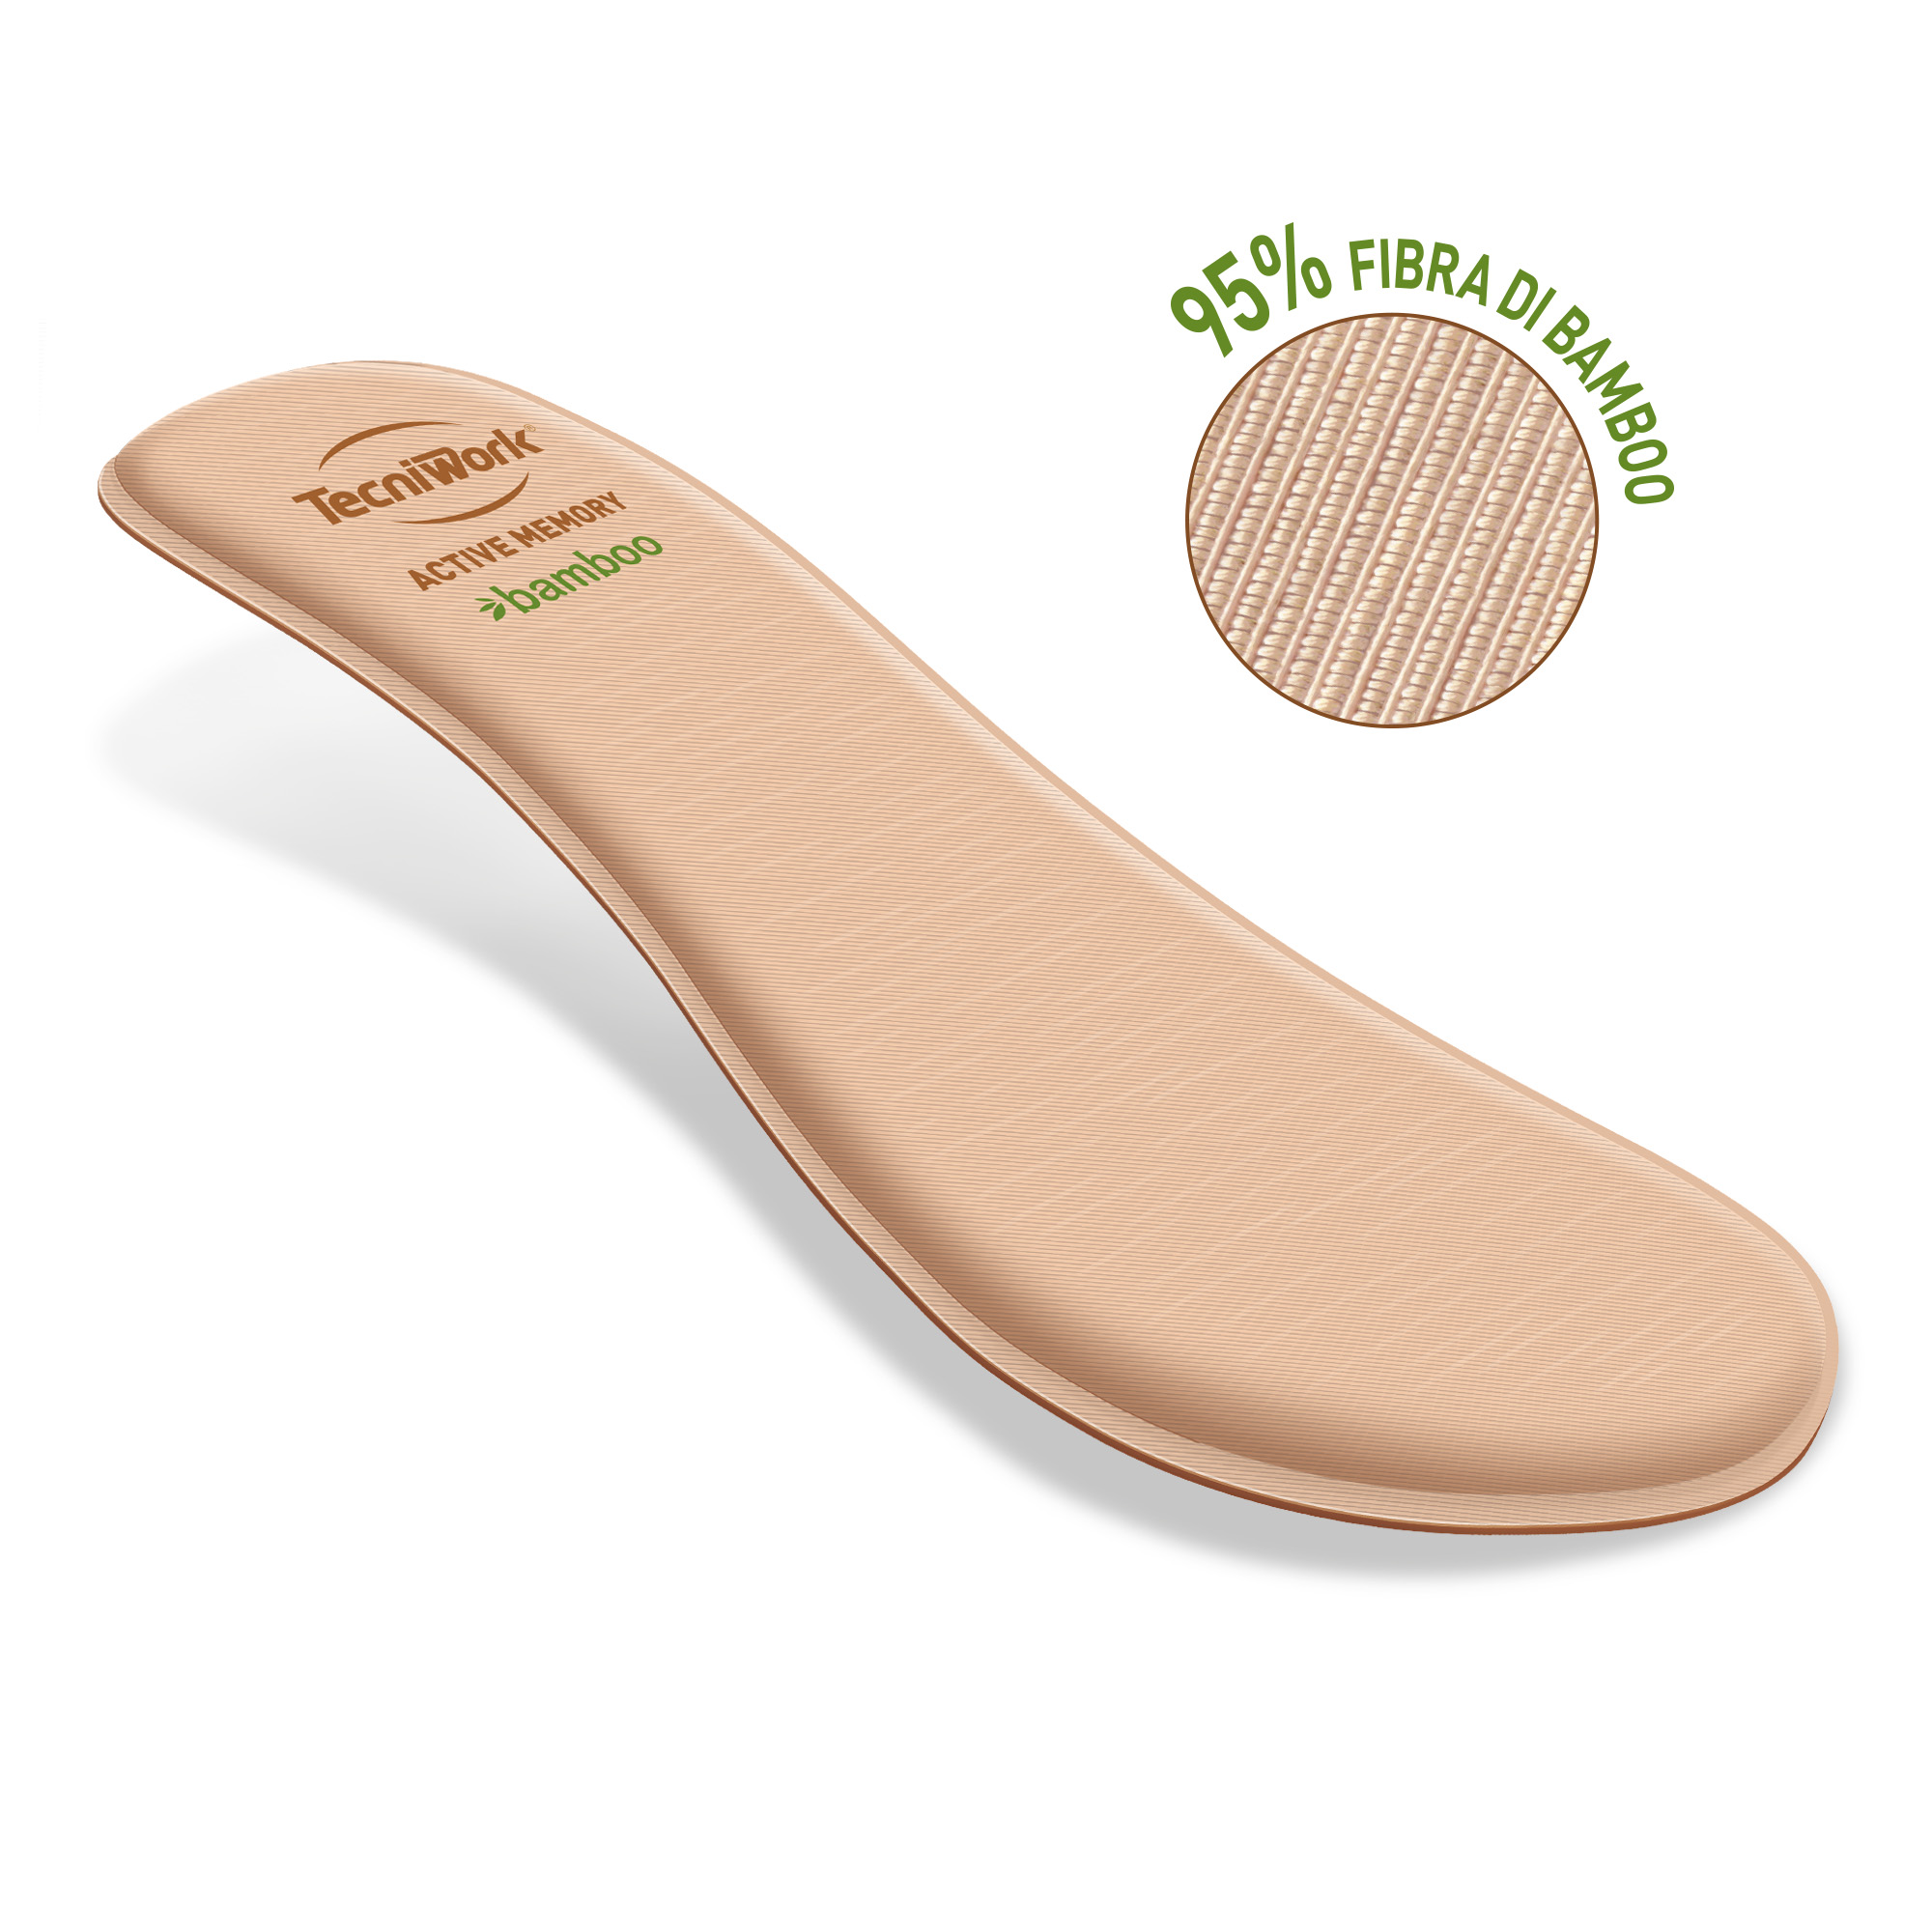 Insoles with Active Memory Bamboo fibre cover 30 pairs display